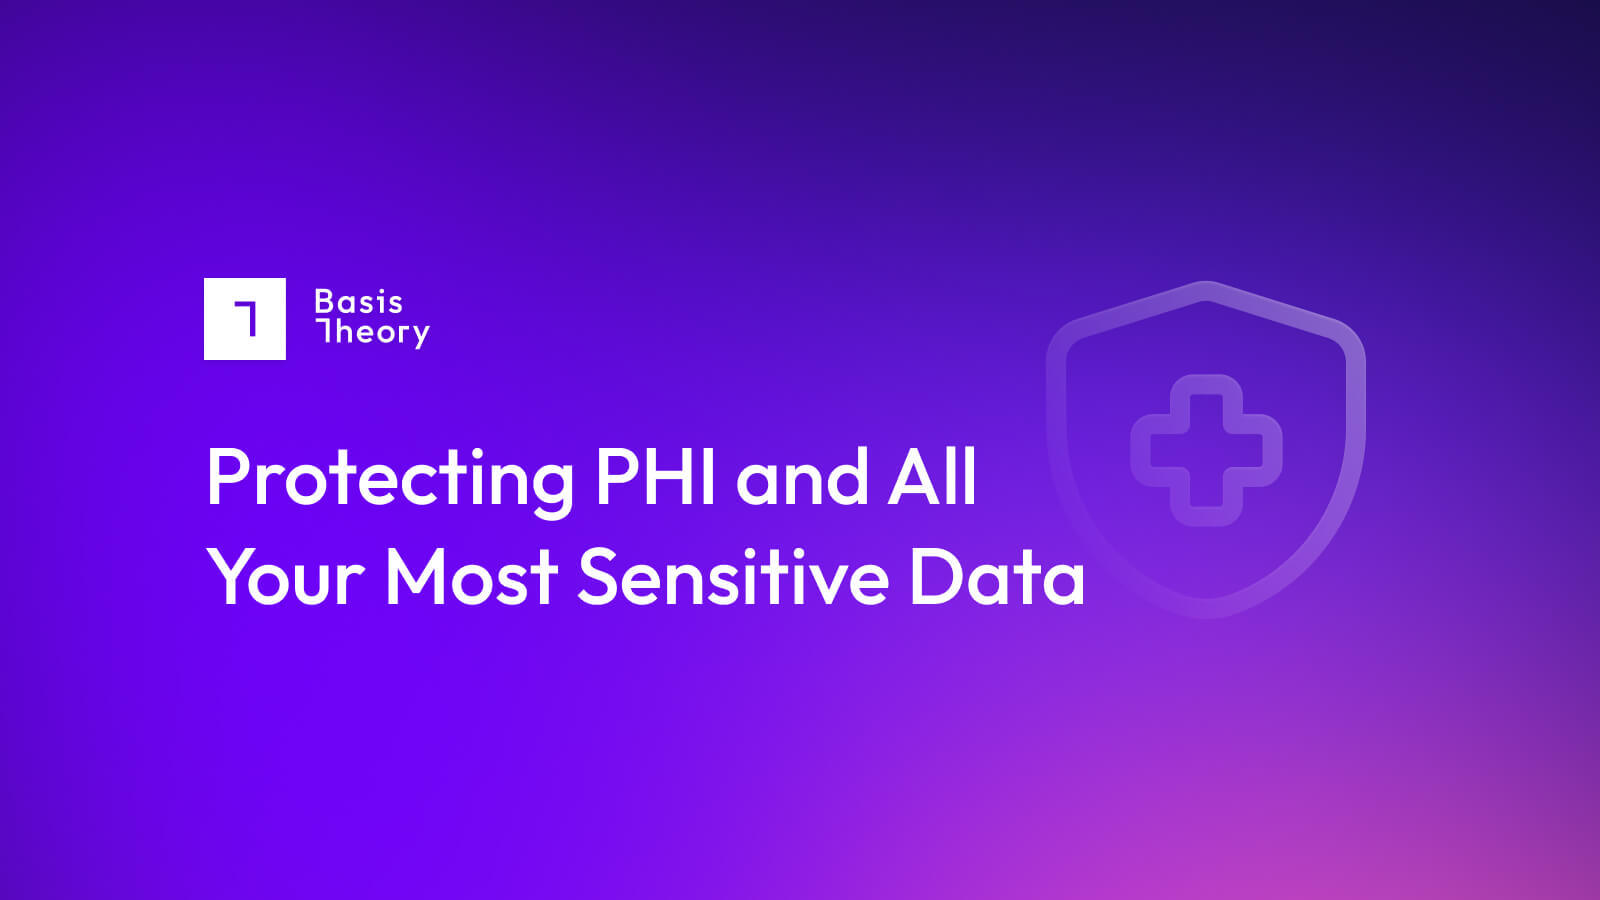 Protecting PHI and all your most sensitive data